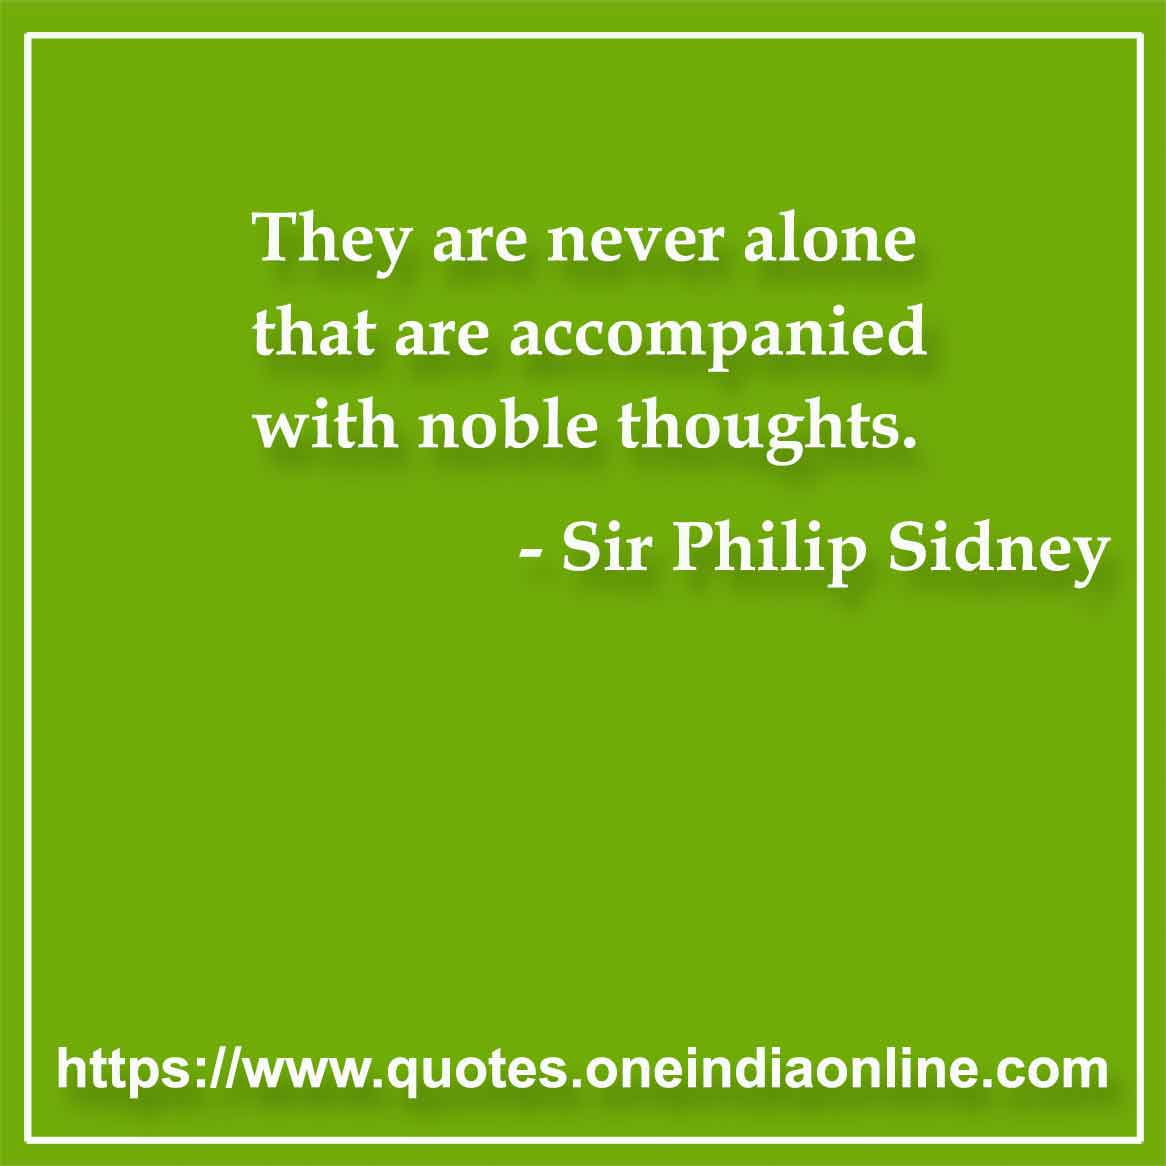 They are never alone that are accompanied with noble thoughts.

- Loneliness Quotes by Sir Philip Sidney 